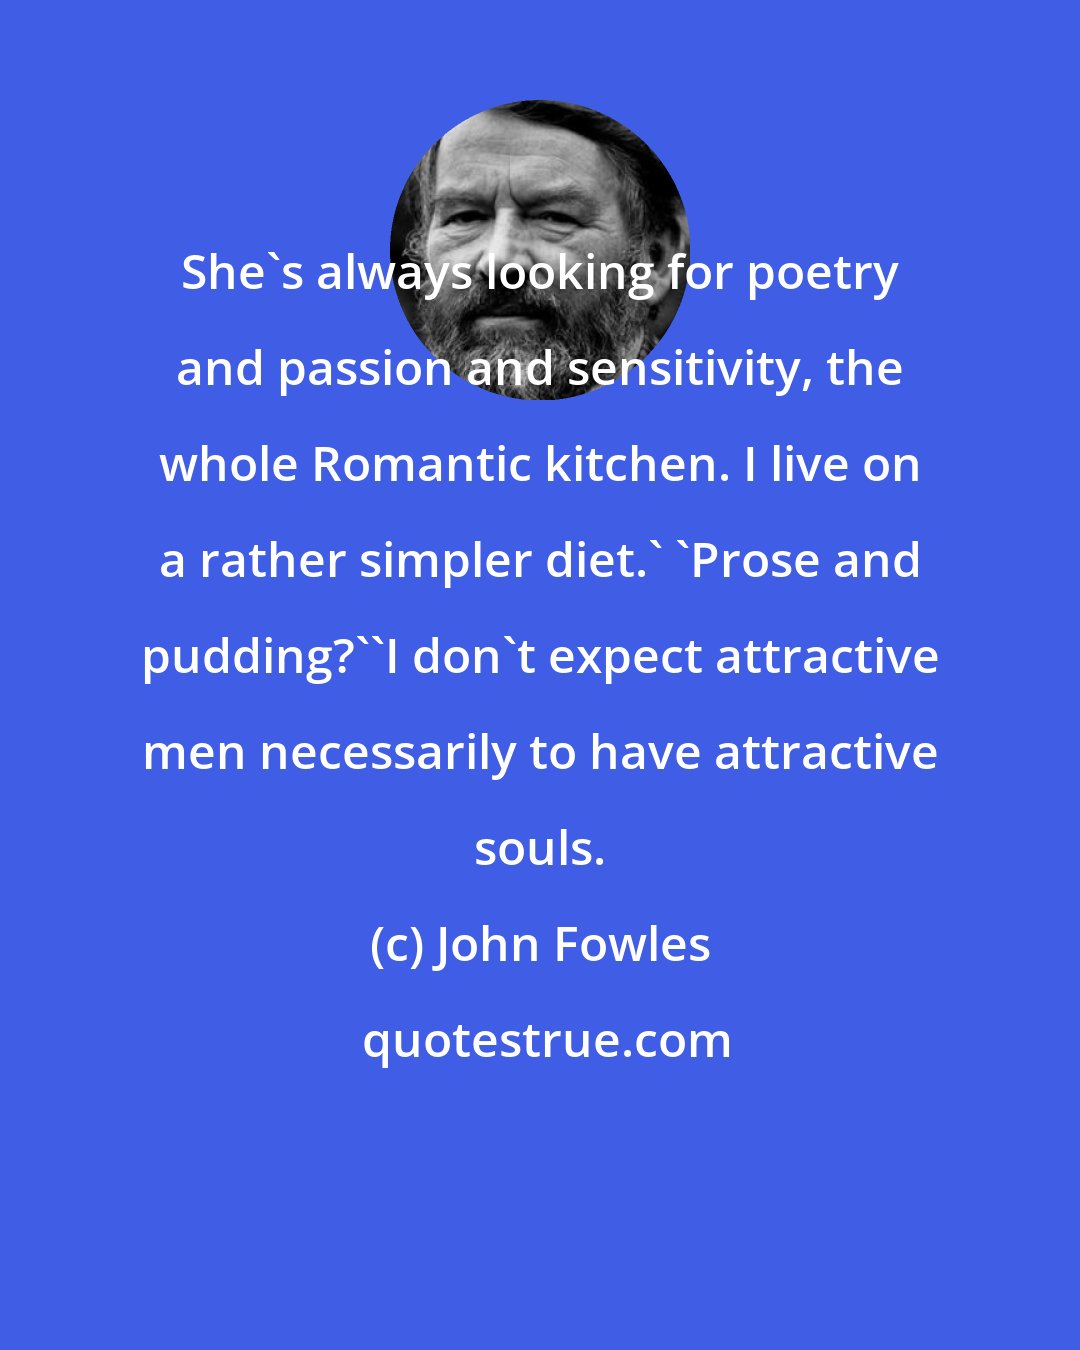 John Fowles: She's always looking for poetry and passion and sensitivity, the whole Romantic kitchen. I live on a rather simpler diet.' 'Prose and pudding?''I don't expect attractive men necessarily to have attractive souls.